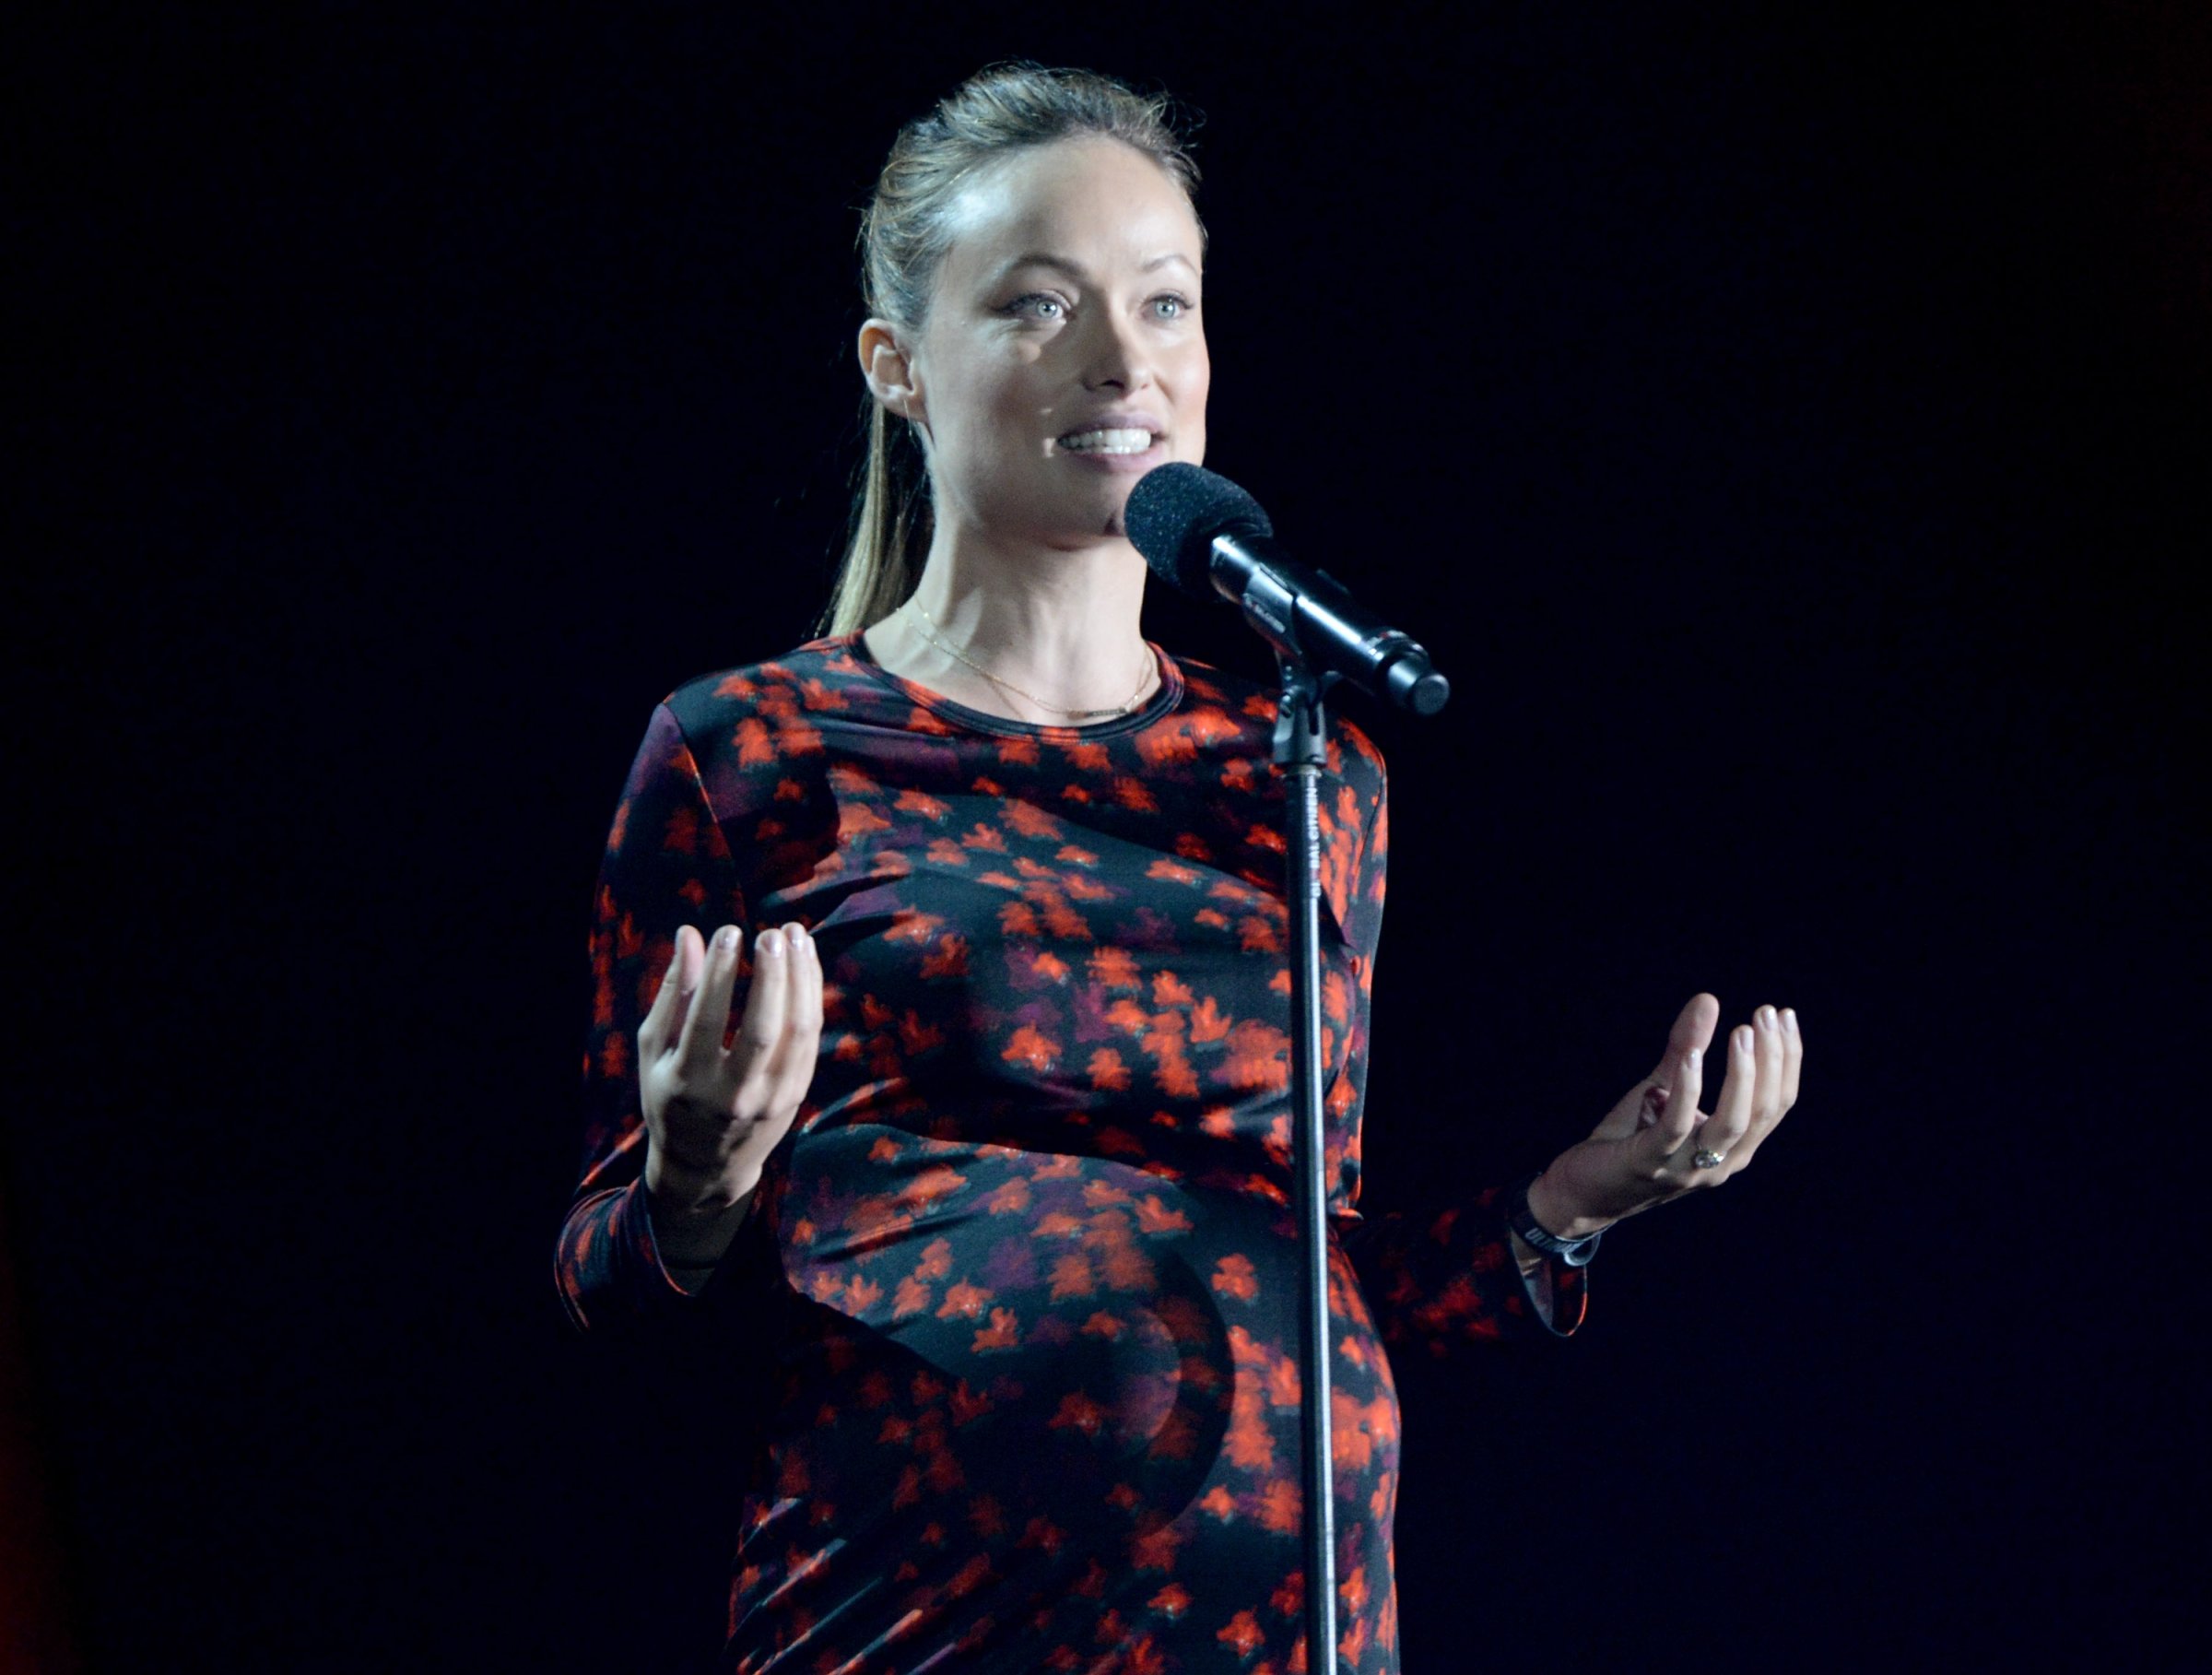 Actress Olivia Wilde presents onstage at the 2016 Global Citizen Festival to End Extreme Poverty by 2030 at Central Park on September 24, 2016 in New York City.